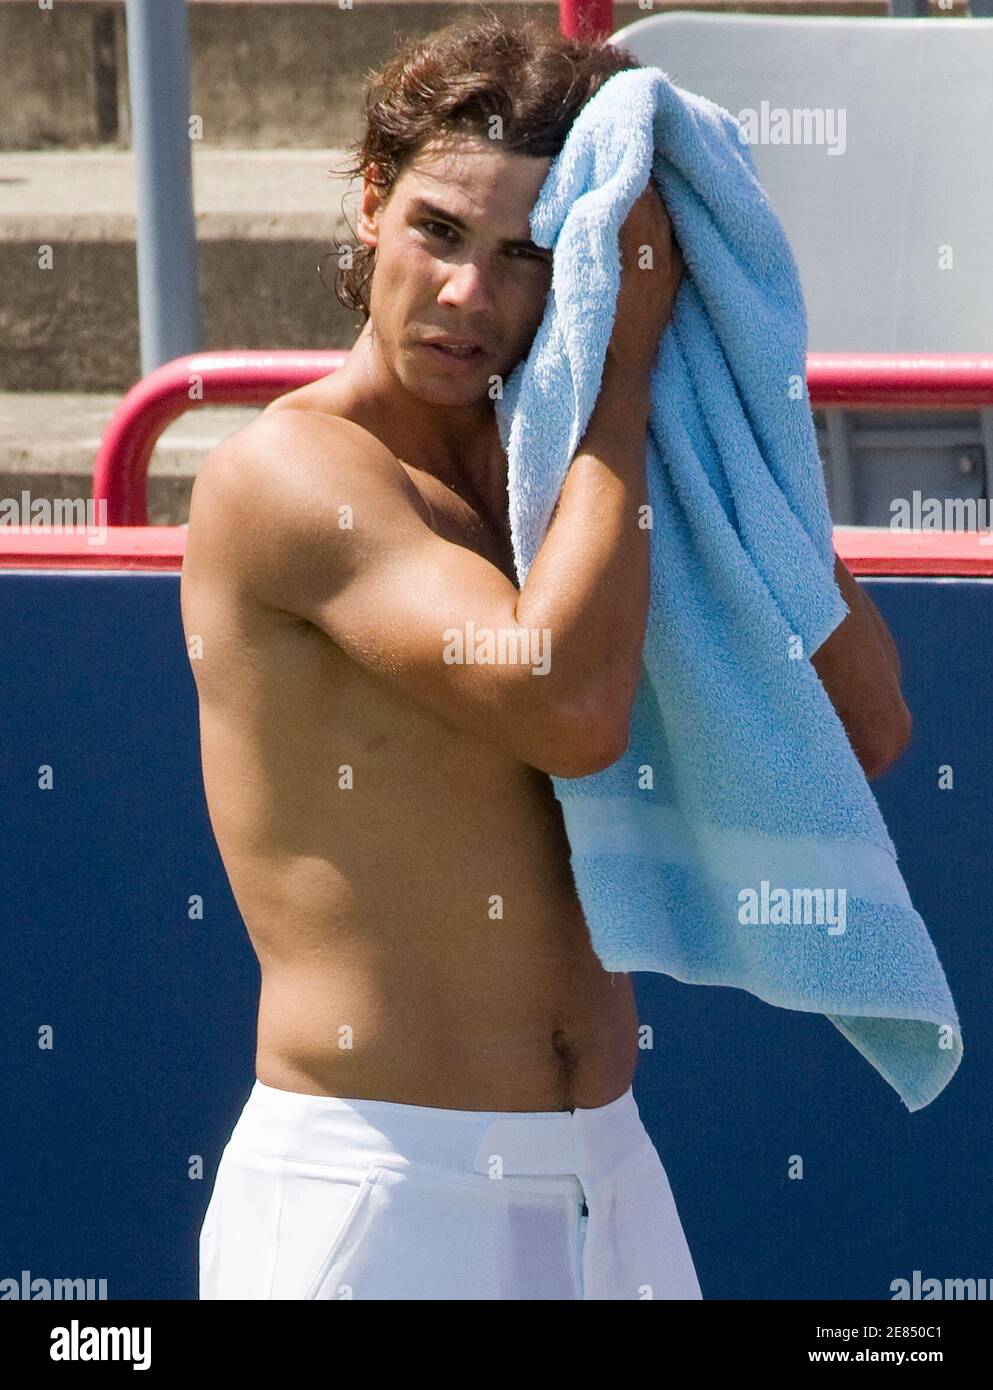 Spain's Rafael Nadal towels off following practice for the Rogers Cup  tennis tournament in Montreal, August 7, 2009. Nadal has been suffering  from tendonitis in both knees and has not played a